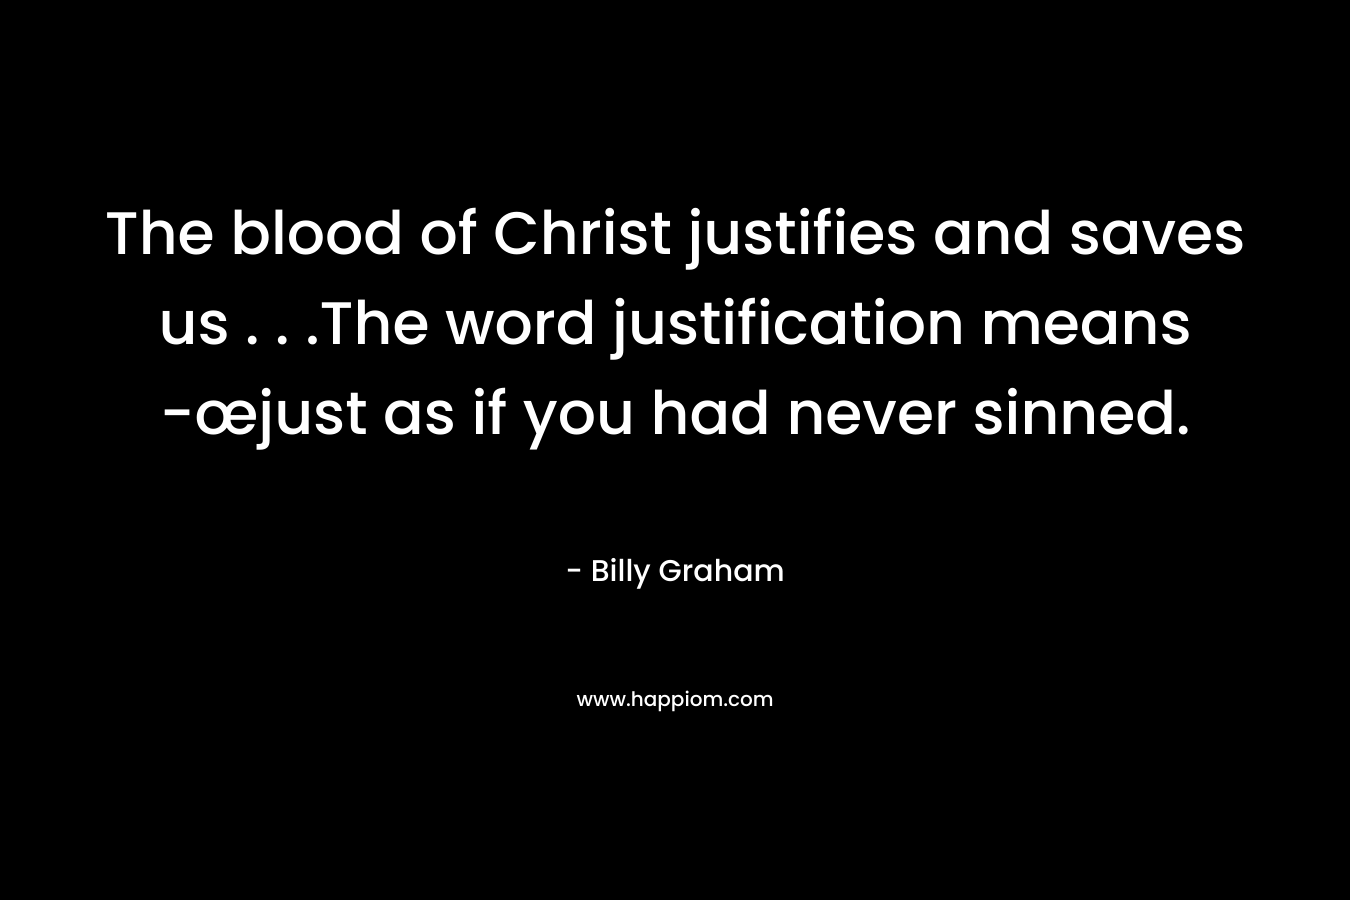 The blood of Christ justifies and saves us . . .The word justification means -œjust as if you had never sinned.